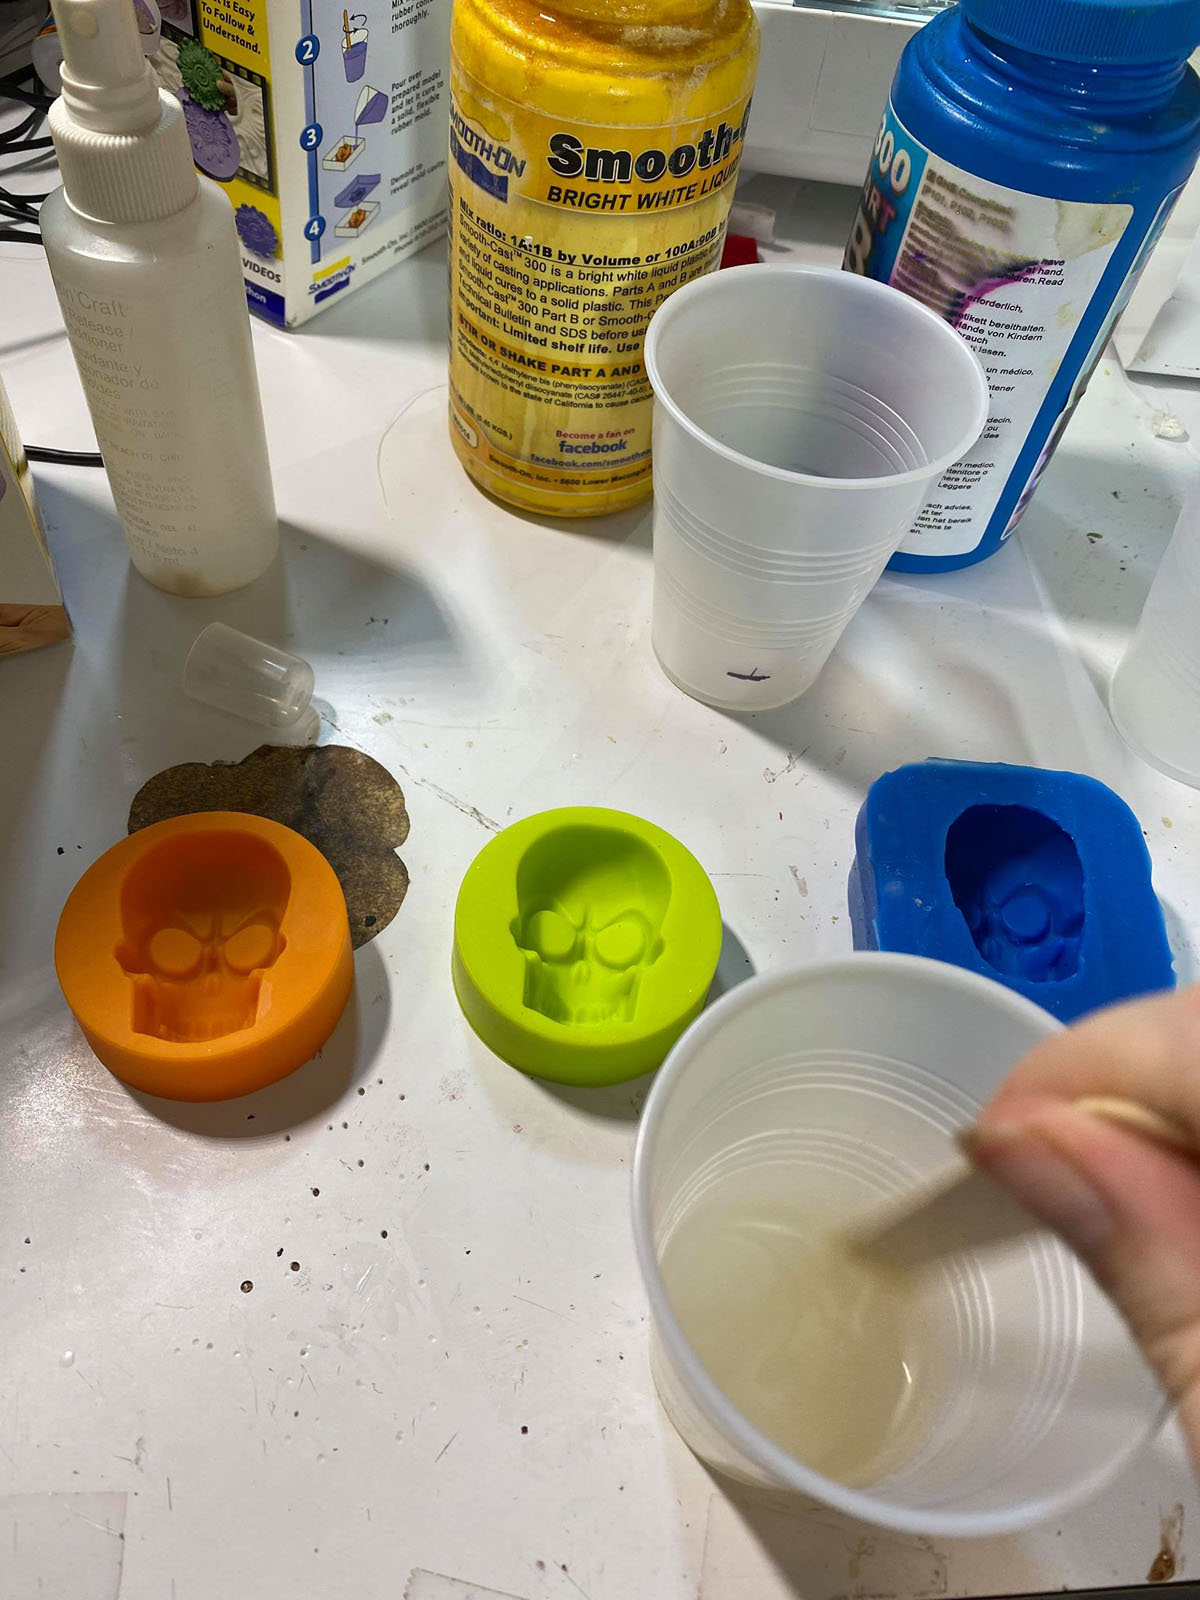 Mixing the Resin To Make the Skulls